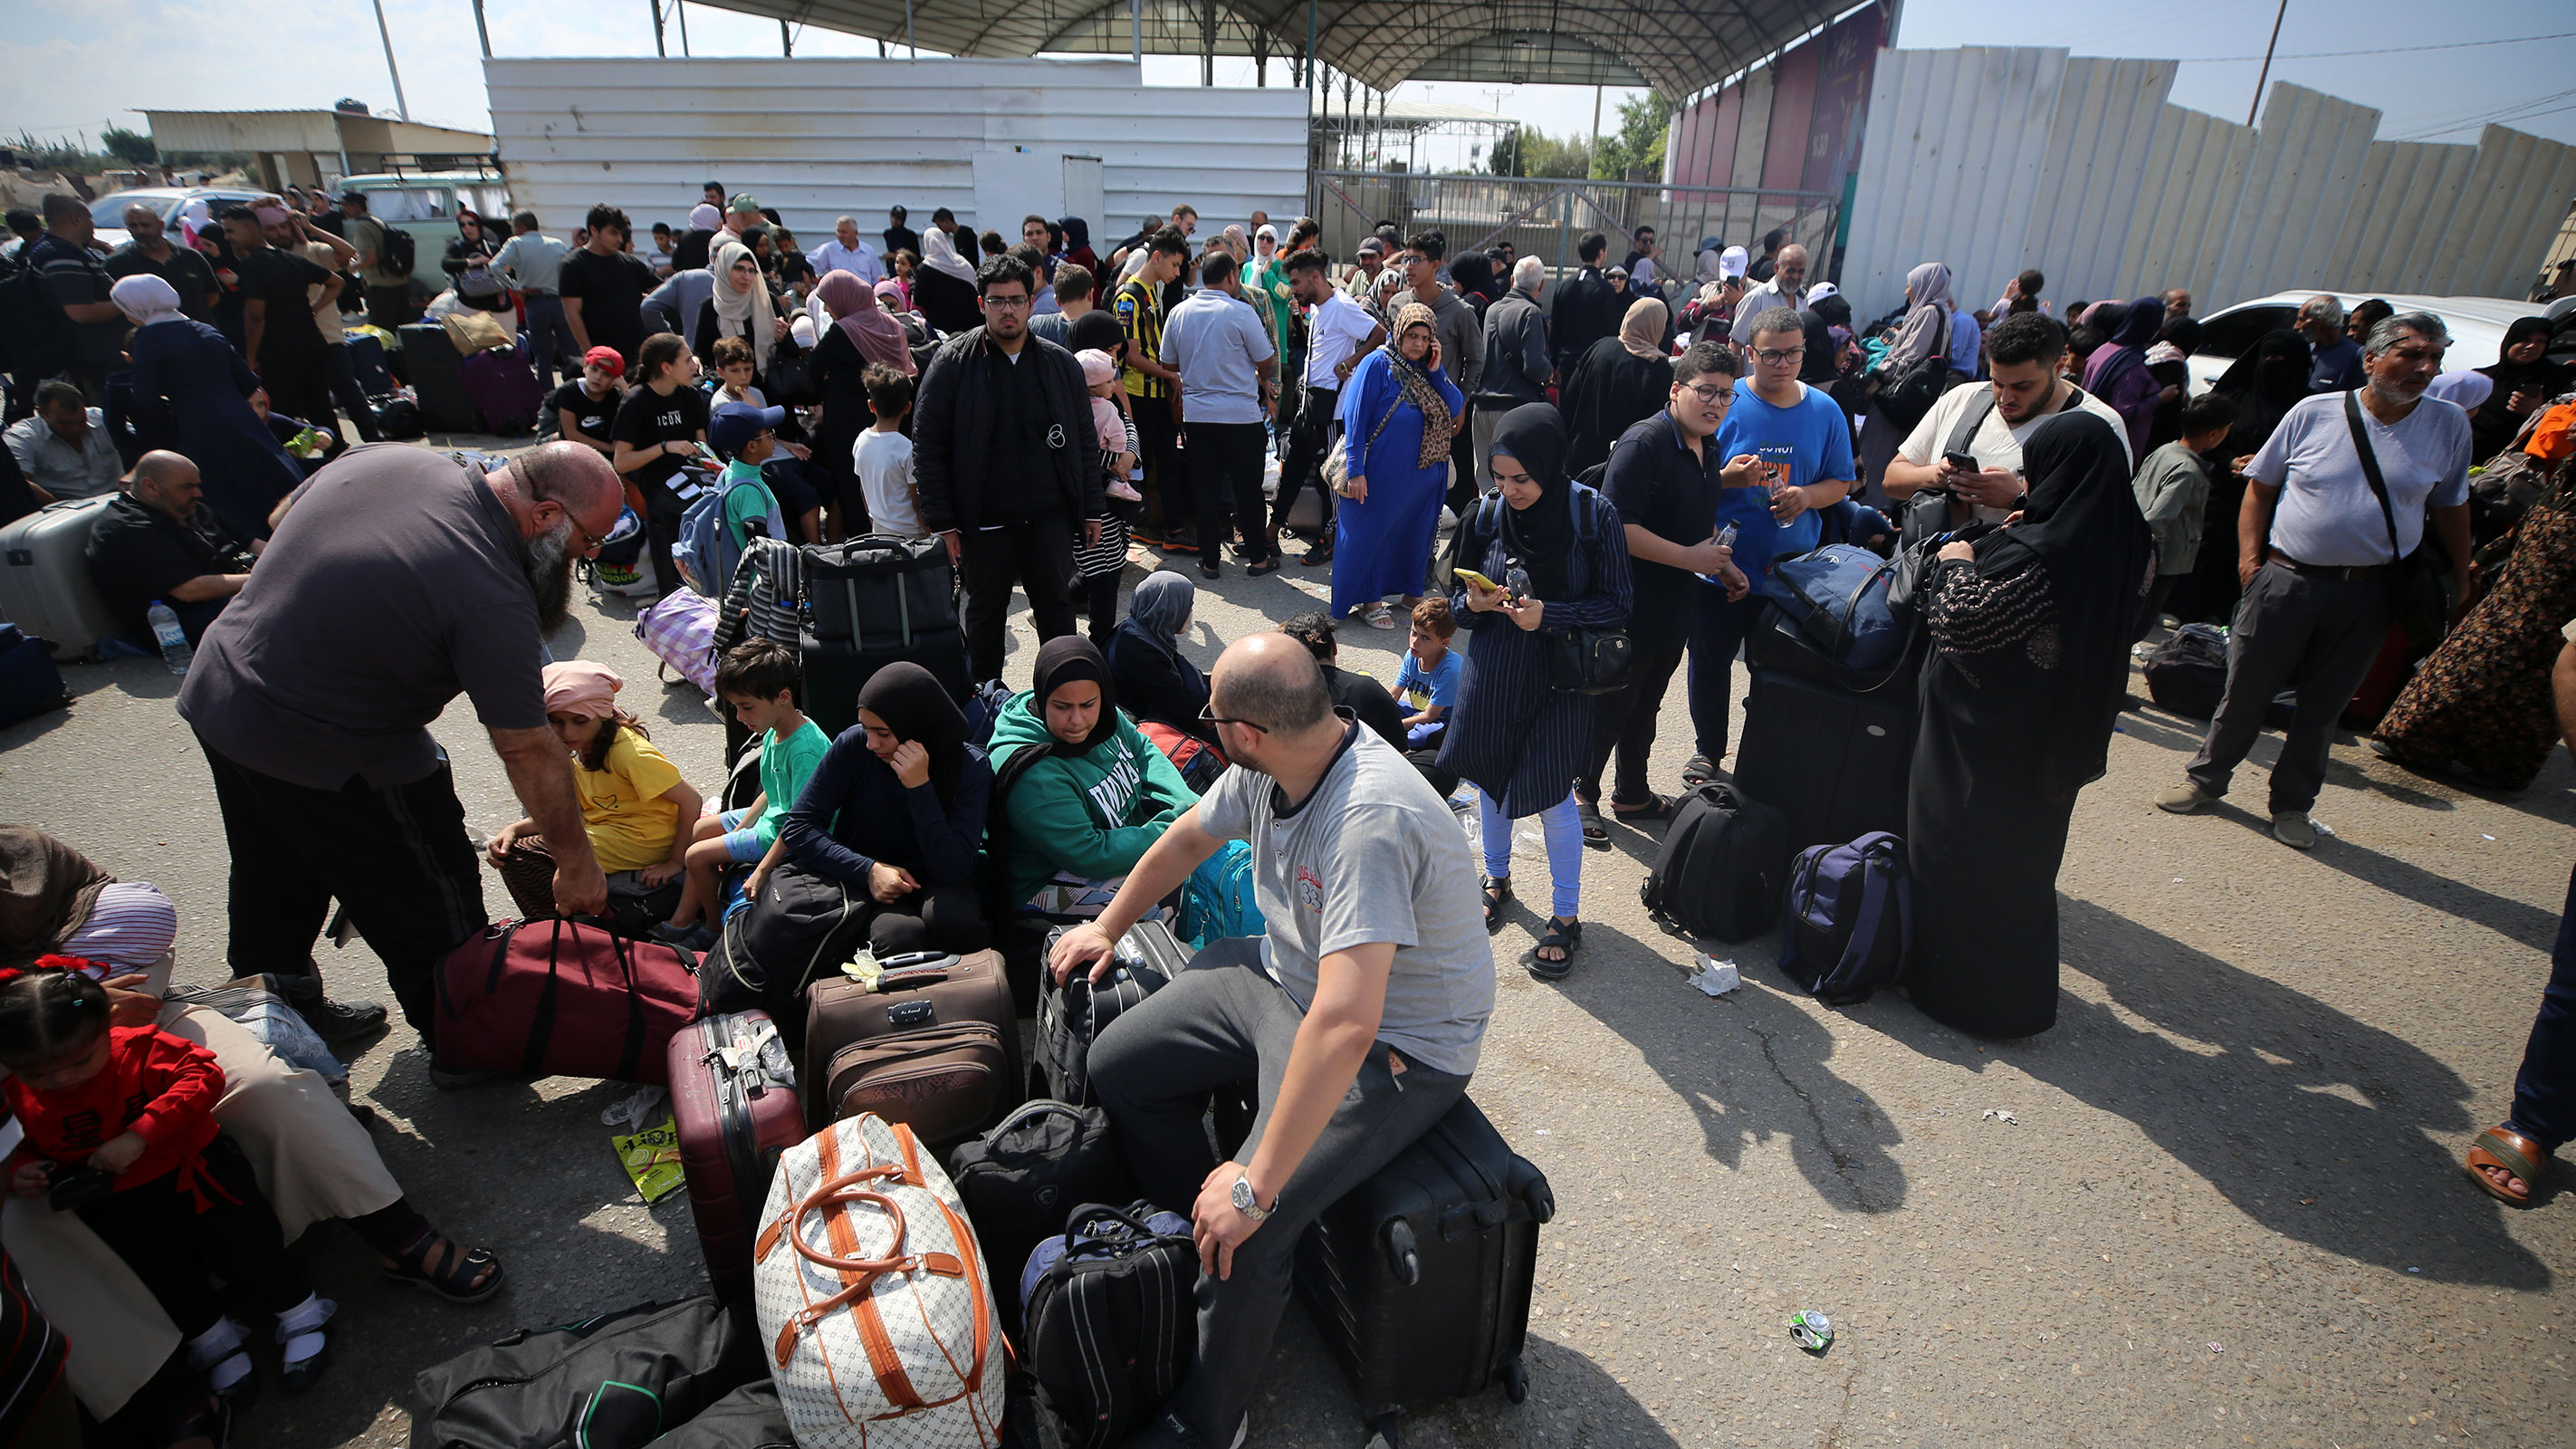 Palestinians, some with foreign passports hoping to cross into Egypt and others waiting for aid, wait at the Rafah crossing in the Gaza Strip on Monday.